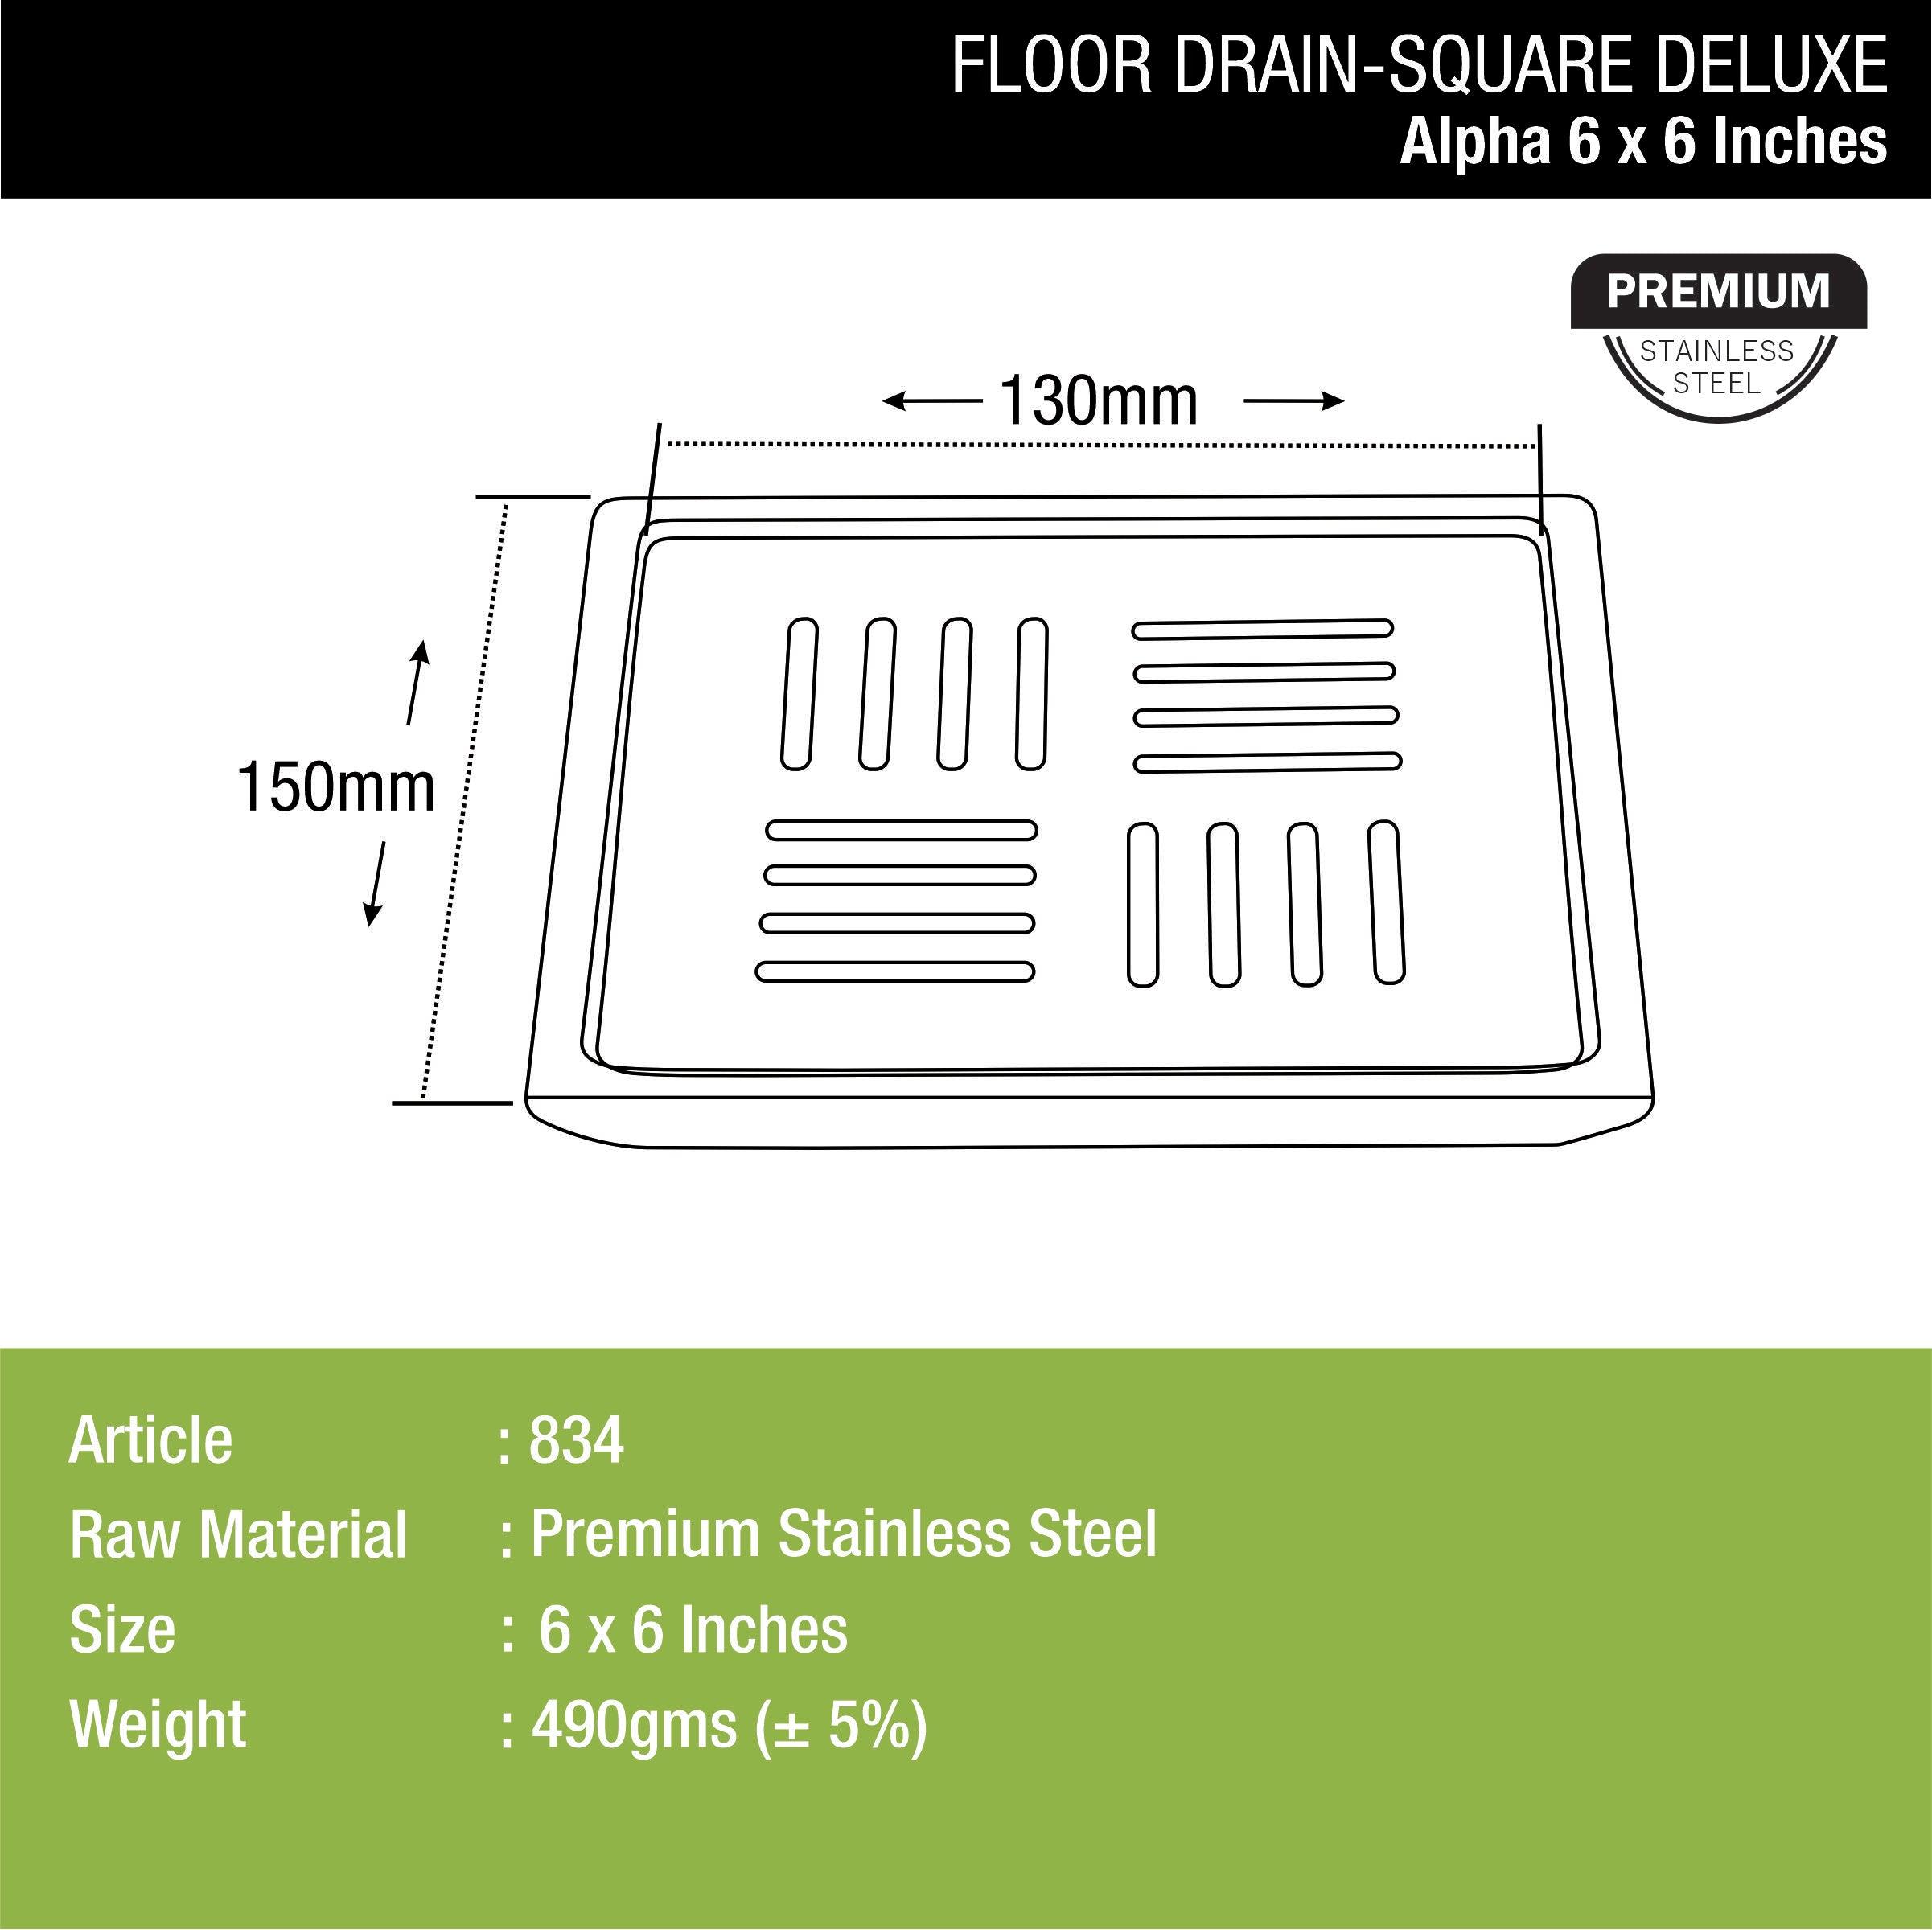 Alpha Deluxe Square Floor Drain (6 x 6 Inches) dimensions and sizes